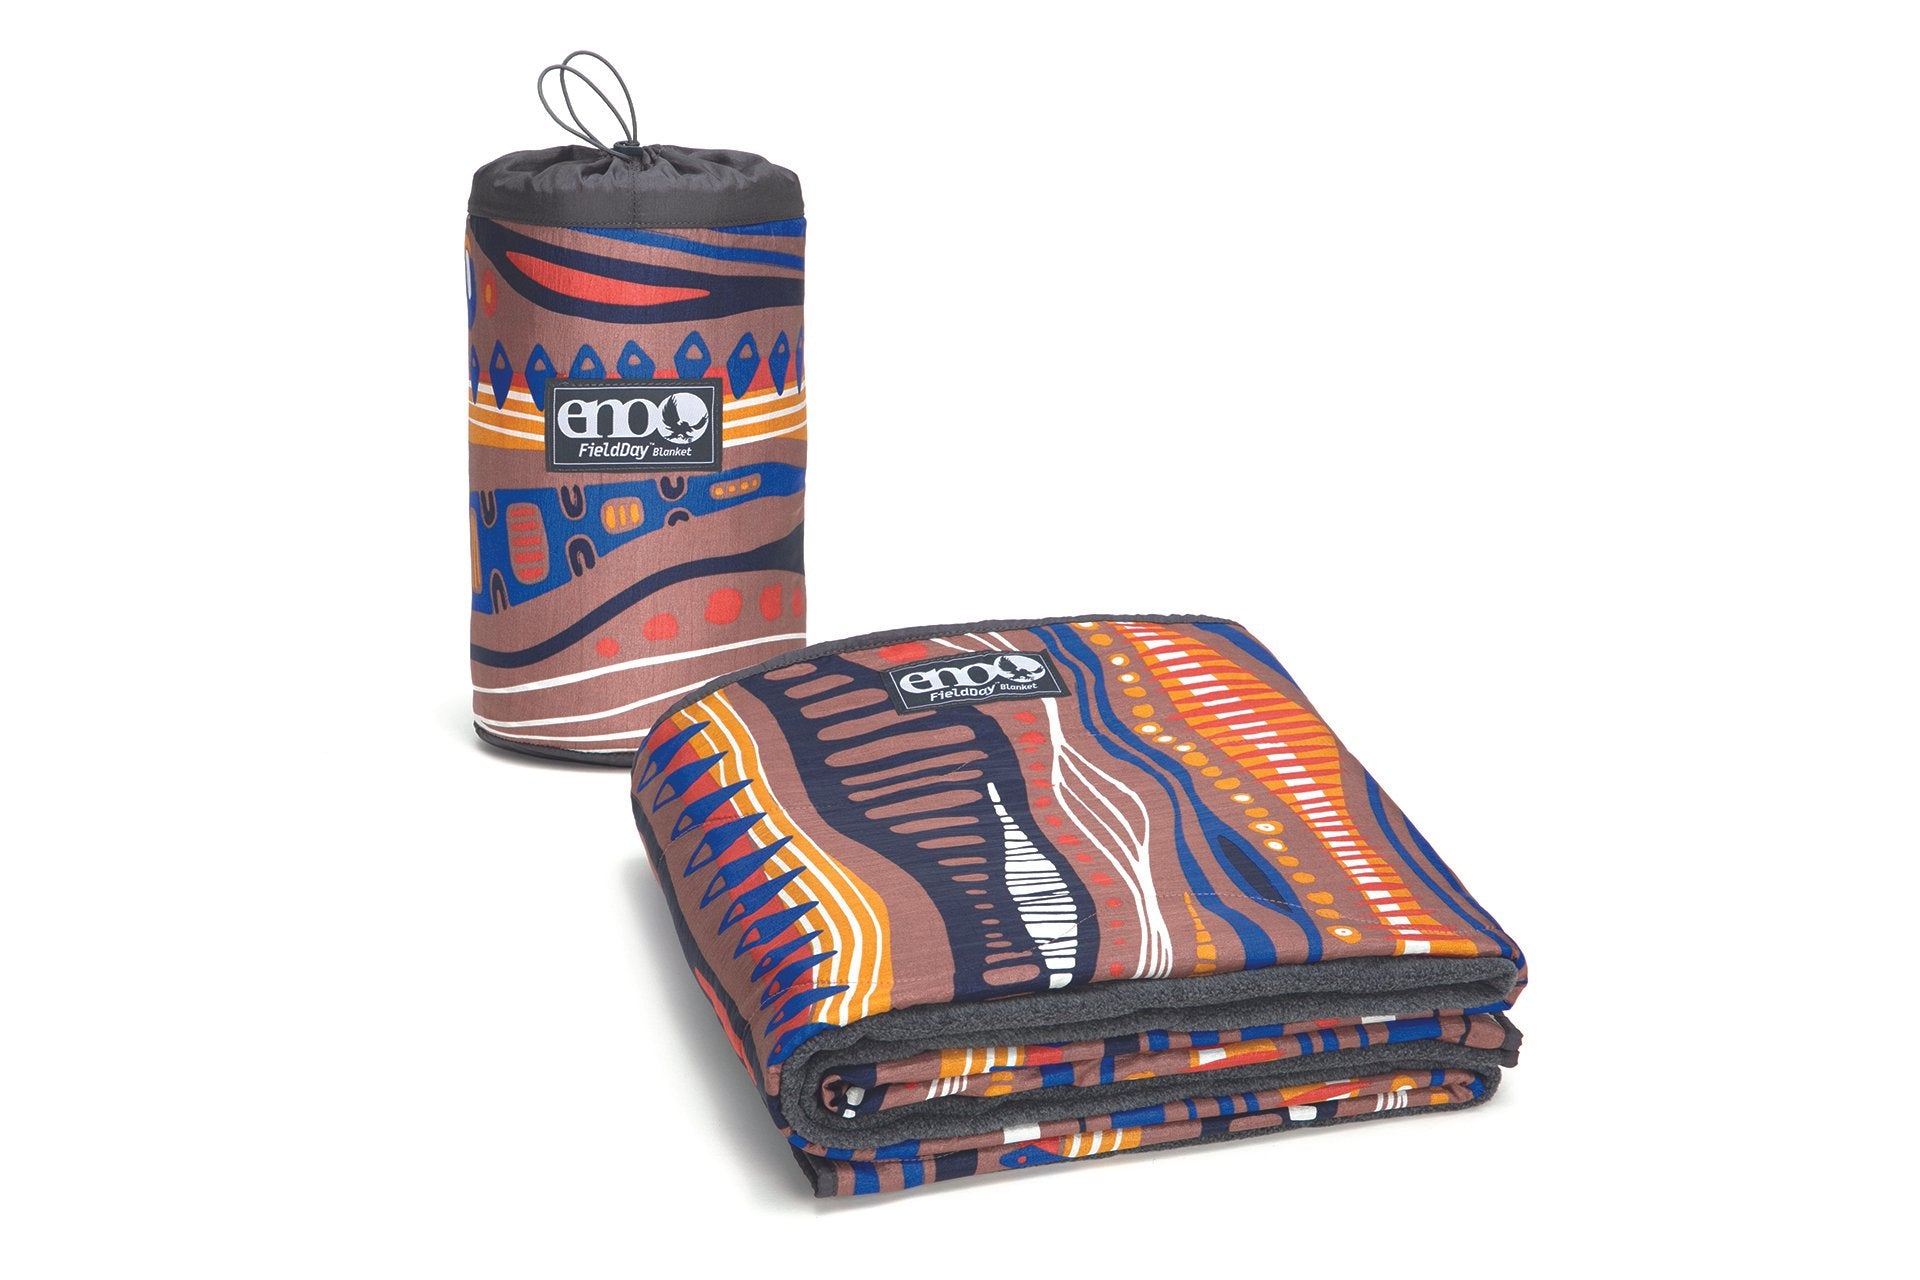 Eagles Nest Outfitters, Inc. Blanket Tundra ENO FieldDay™ Blanket